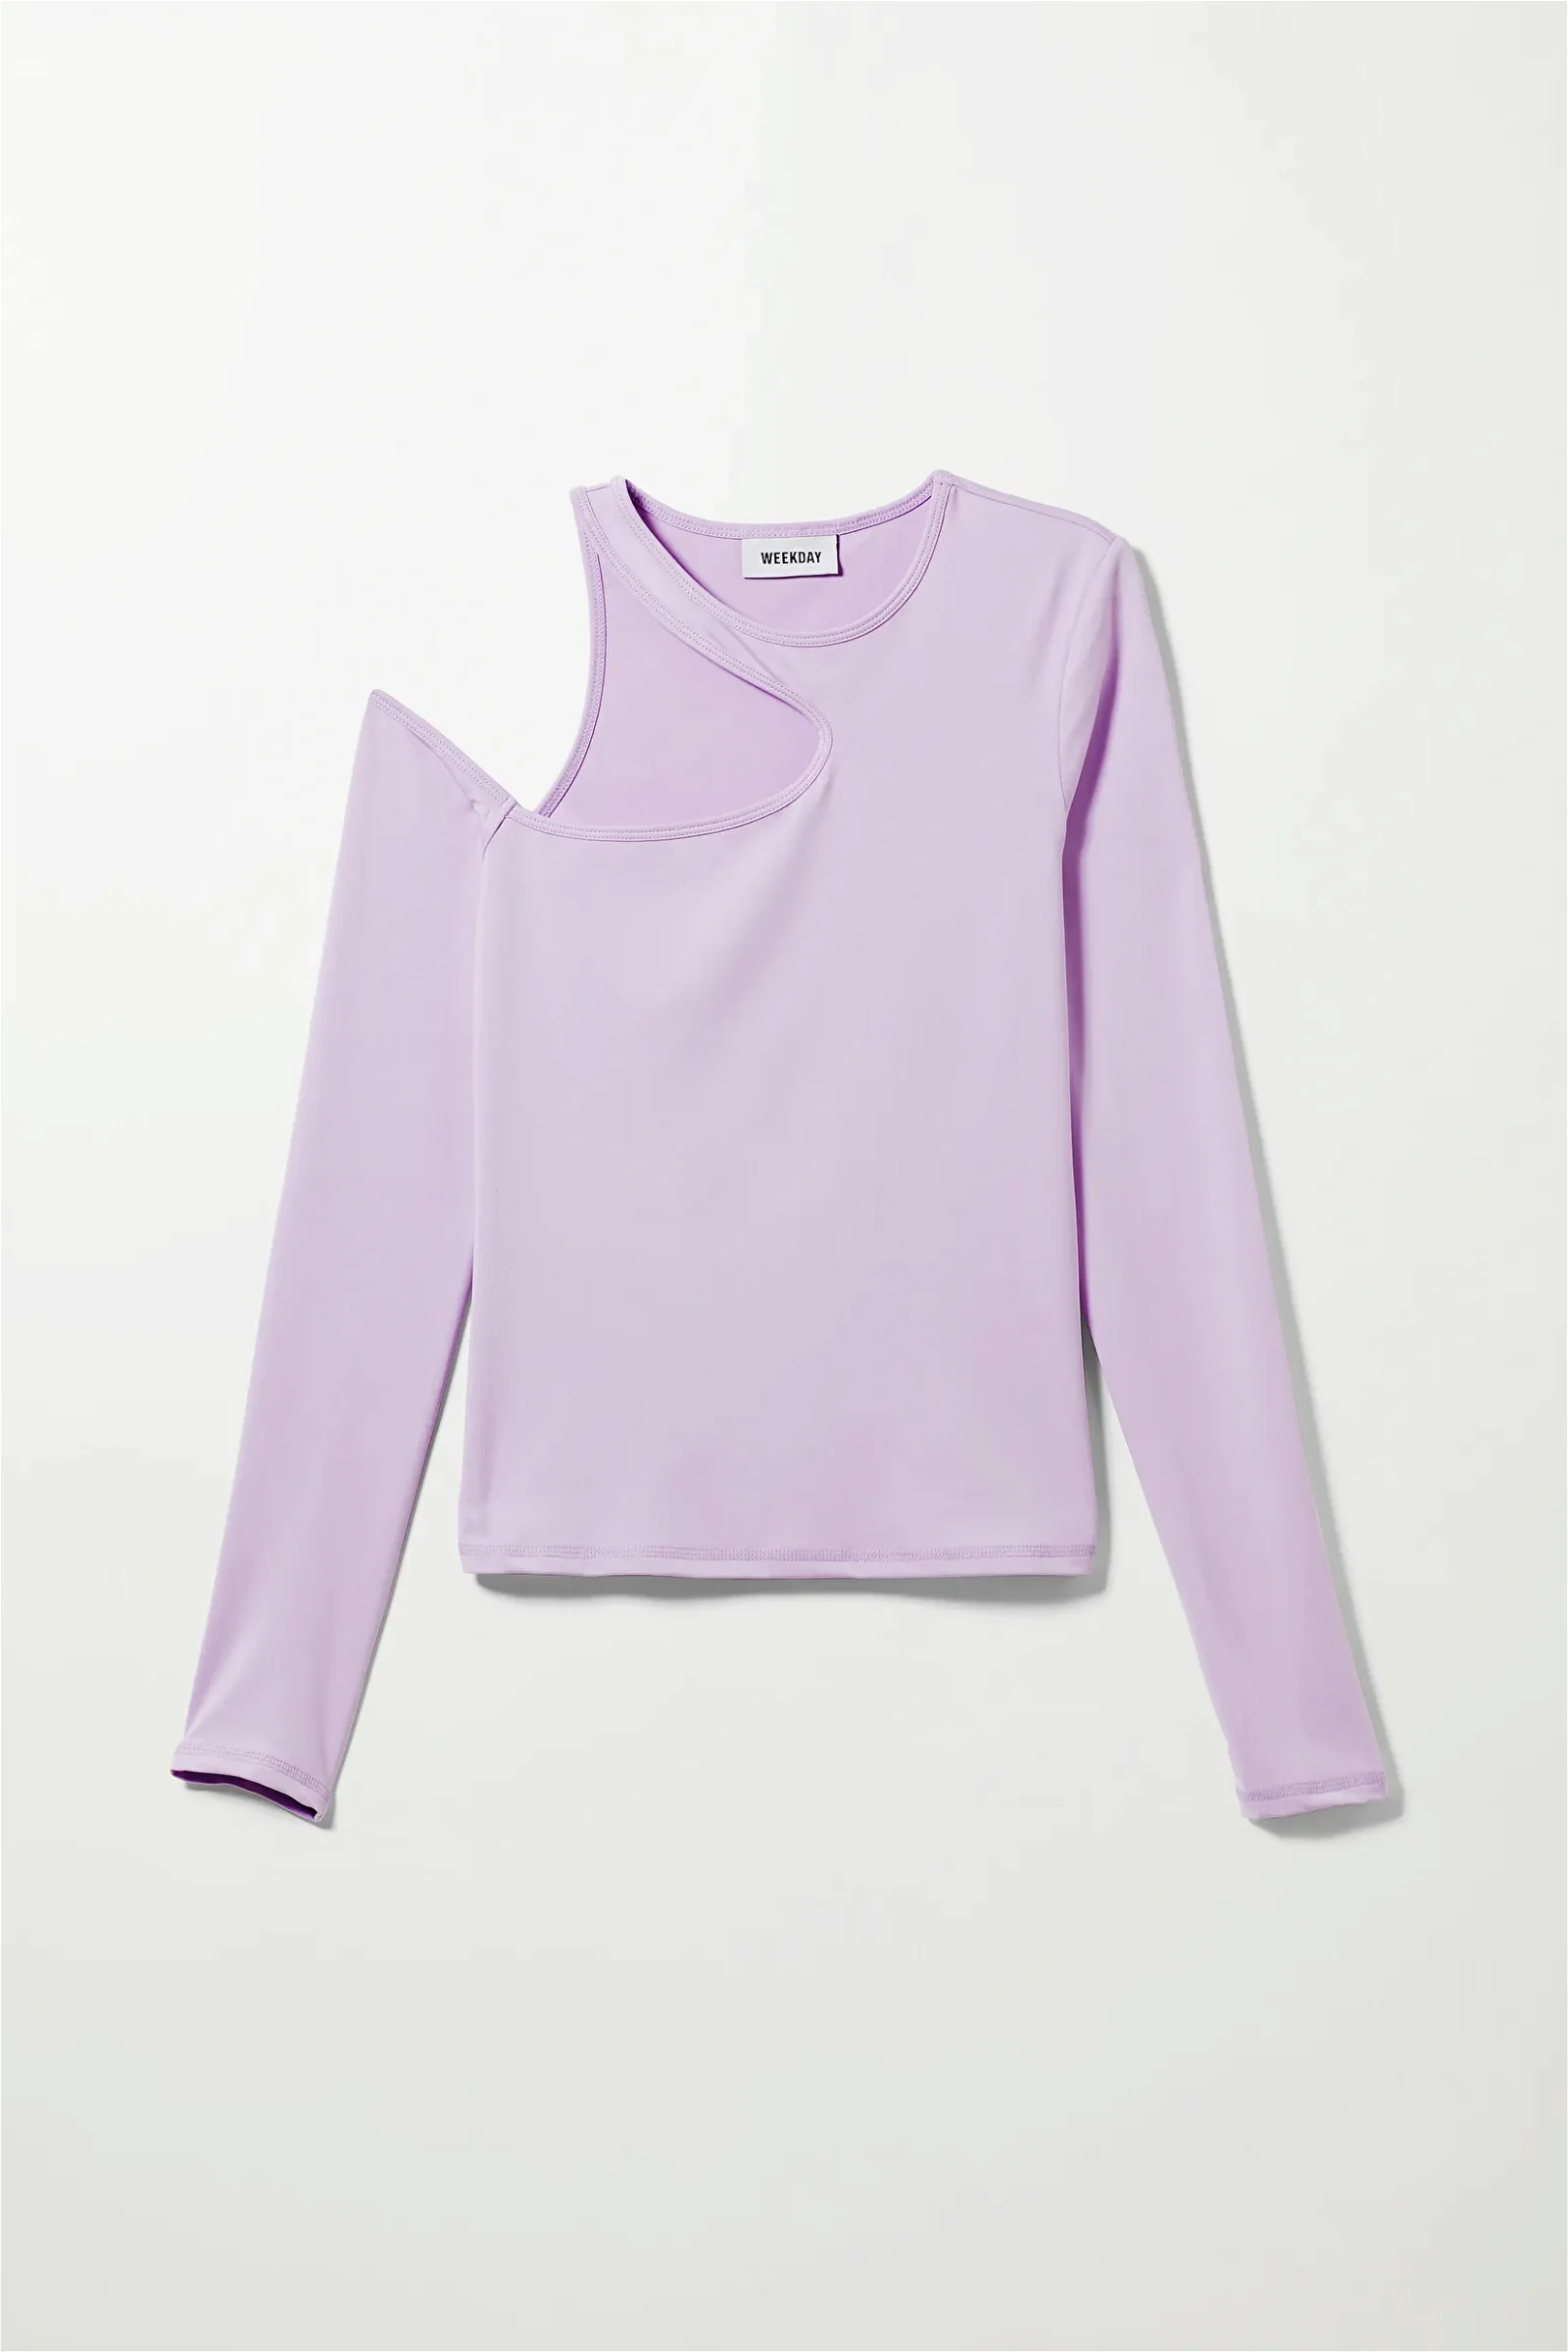 WEEKDAY Ambria Long Sleeve in Endource | Lilac